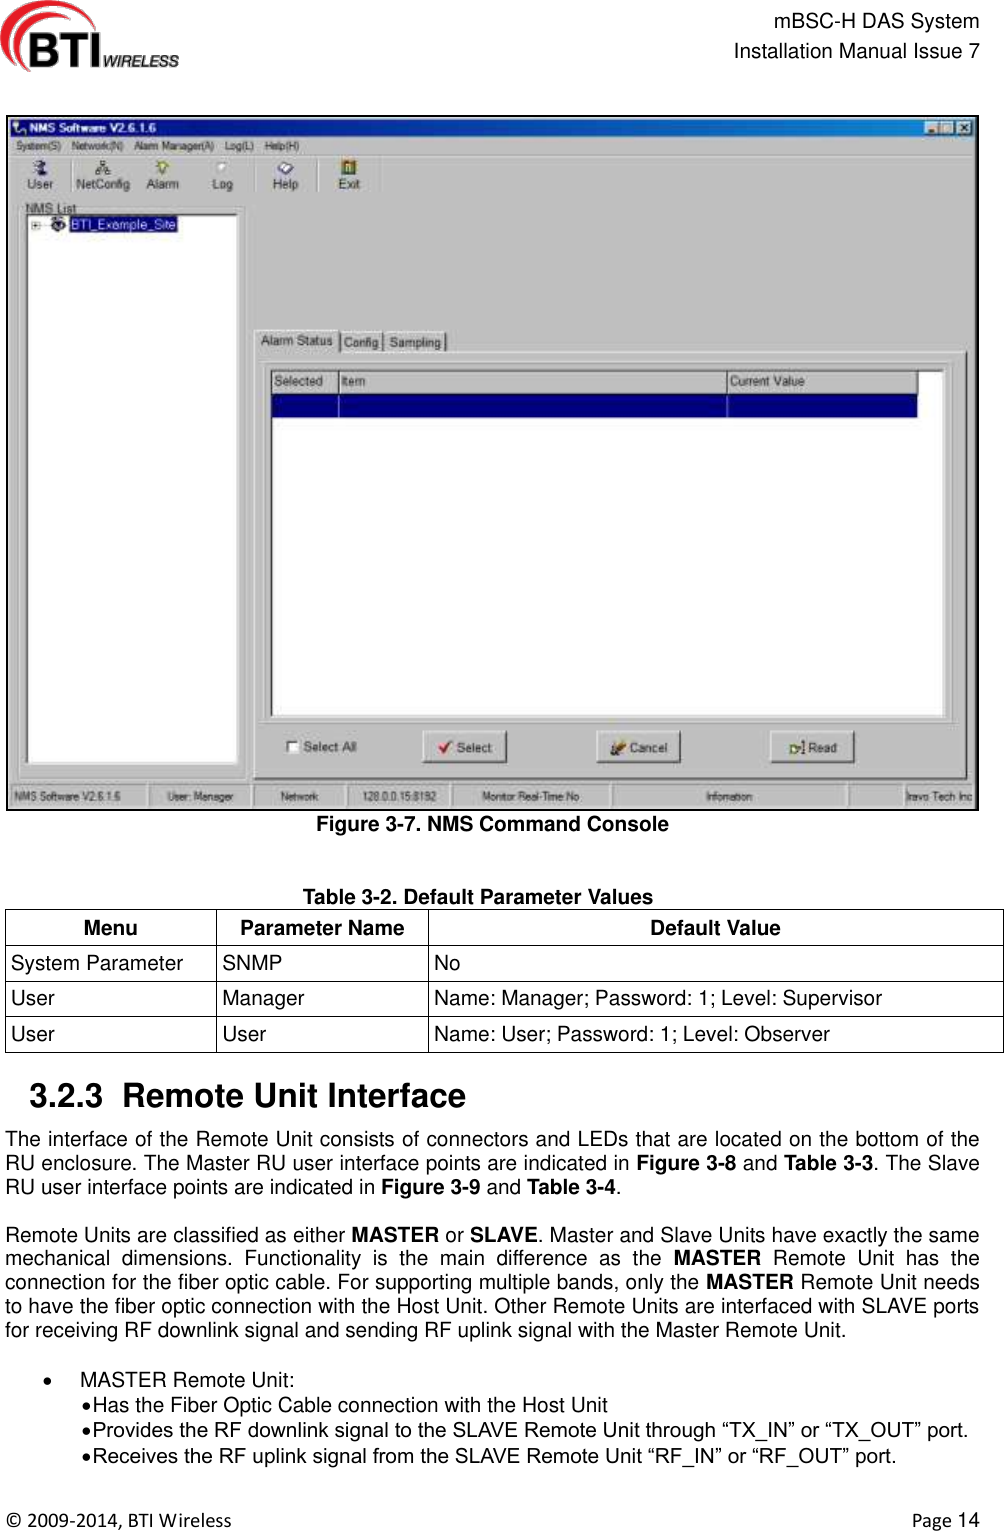                                                   mBSC-H DAS System   Installation Manual Issue 7  ©  2009-2014, BTI Wireless    Page 14  Figure 3-7. NMS Command Console  Table 3-2. Default Parameter Values Menu Parameter Name Default Value System Parameter SNMP No User Manager Name: Manager; Password: 1; Level: Supervisor User User Name: User; Password: 1; Level: Observer   3.2.3  Remote Unit Interface   The interface of the Remote Unit consists of connectors and LEDs that are located on the bottom of the RU enclosure. The Master RU user interface points are indicated in Figure 3-8 and Table 3-3. The Slave RU user interface points are indicated in Figure 3-9 and Table 3-4.  Remote Units are classified as either MASTER or SLAVE. Master and Slave Units have exactly the same   mechanical  dimensions.  Functionality  is  the  main  difference  as  the  MASTER  Remote  Unit  has  the connection for the fiber optic cable. For supporting multiple bands, only the MASTER Remote Unit needs to have the fiber optic connection with the Host Unit. Other Remote Units are interfaced with SLAVE ports for receiving RF downlink signal and sending RF uplink signal with the Master Remote Unit.    MASTER Remote Unit:  Has the Fiber Optic Cable connection with the Host Unit  Provides the RF downlink signal to the SLAVE Remote Unit through “TX_IN” or “TX_OUT” port.  Receives the RF uplink signal from the SLAVE Remote Unit “RF_IN” or “RF_OUT” port.  